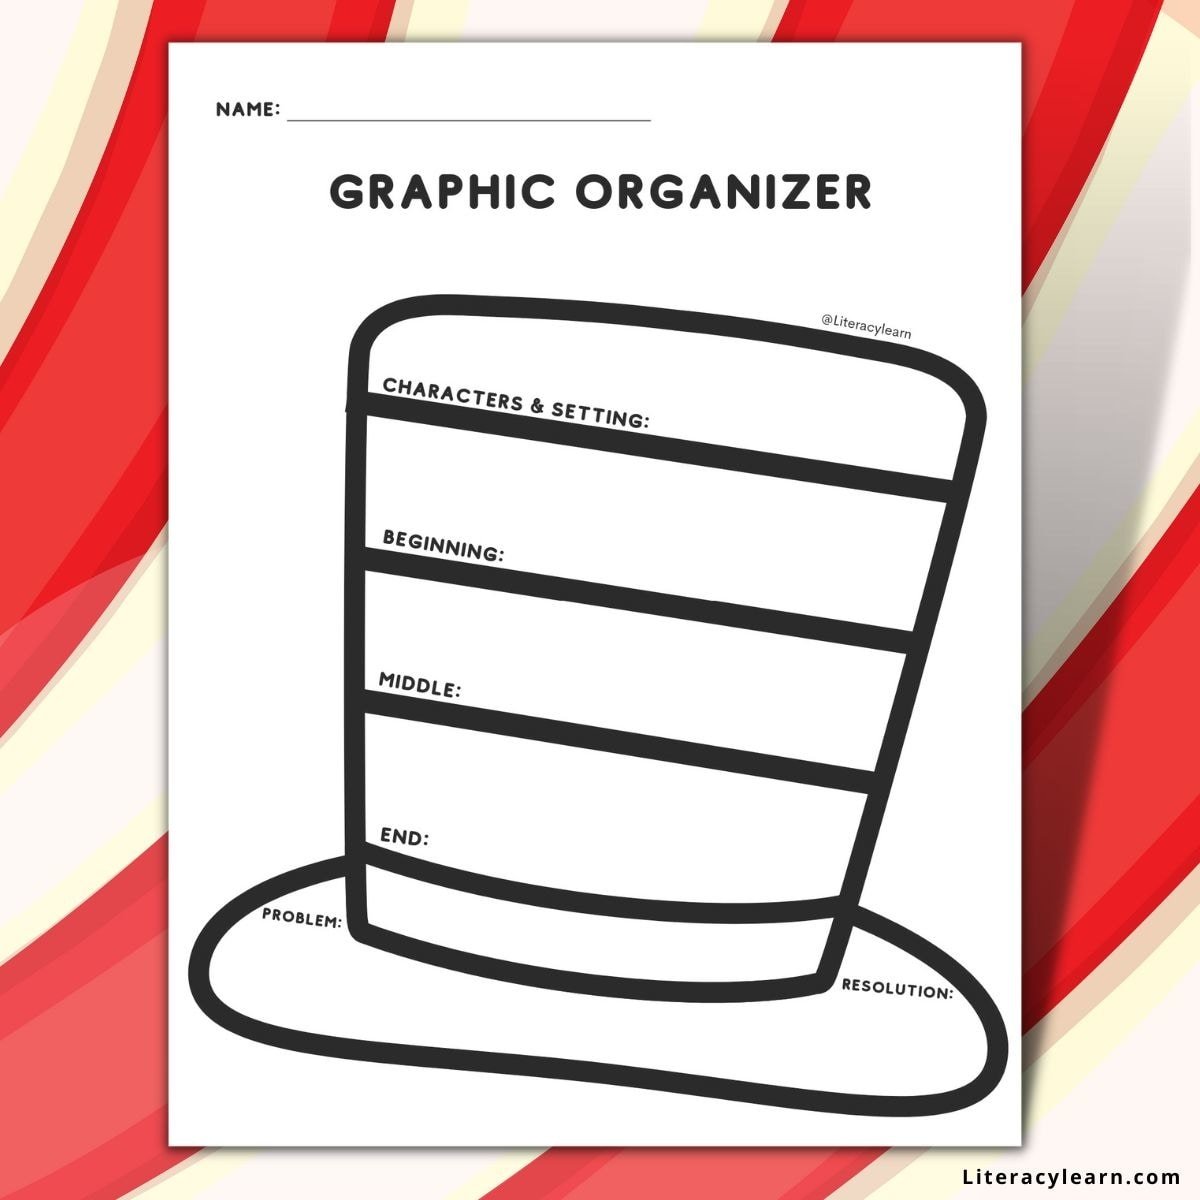 A red & white striped background with plot element graphic organizer like Cat in the Hat.